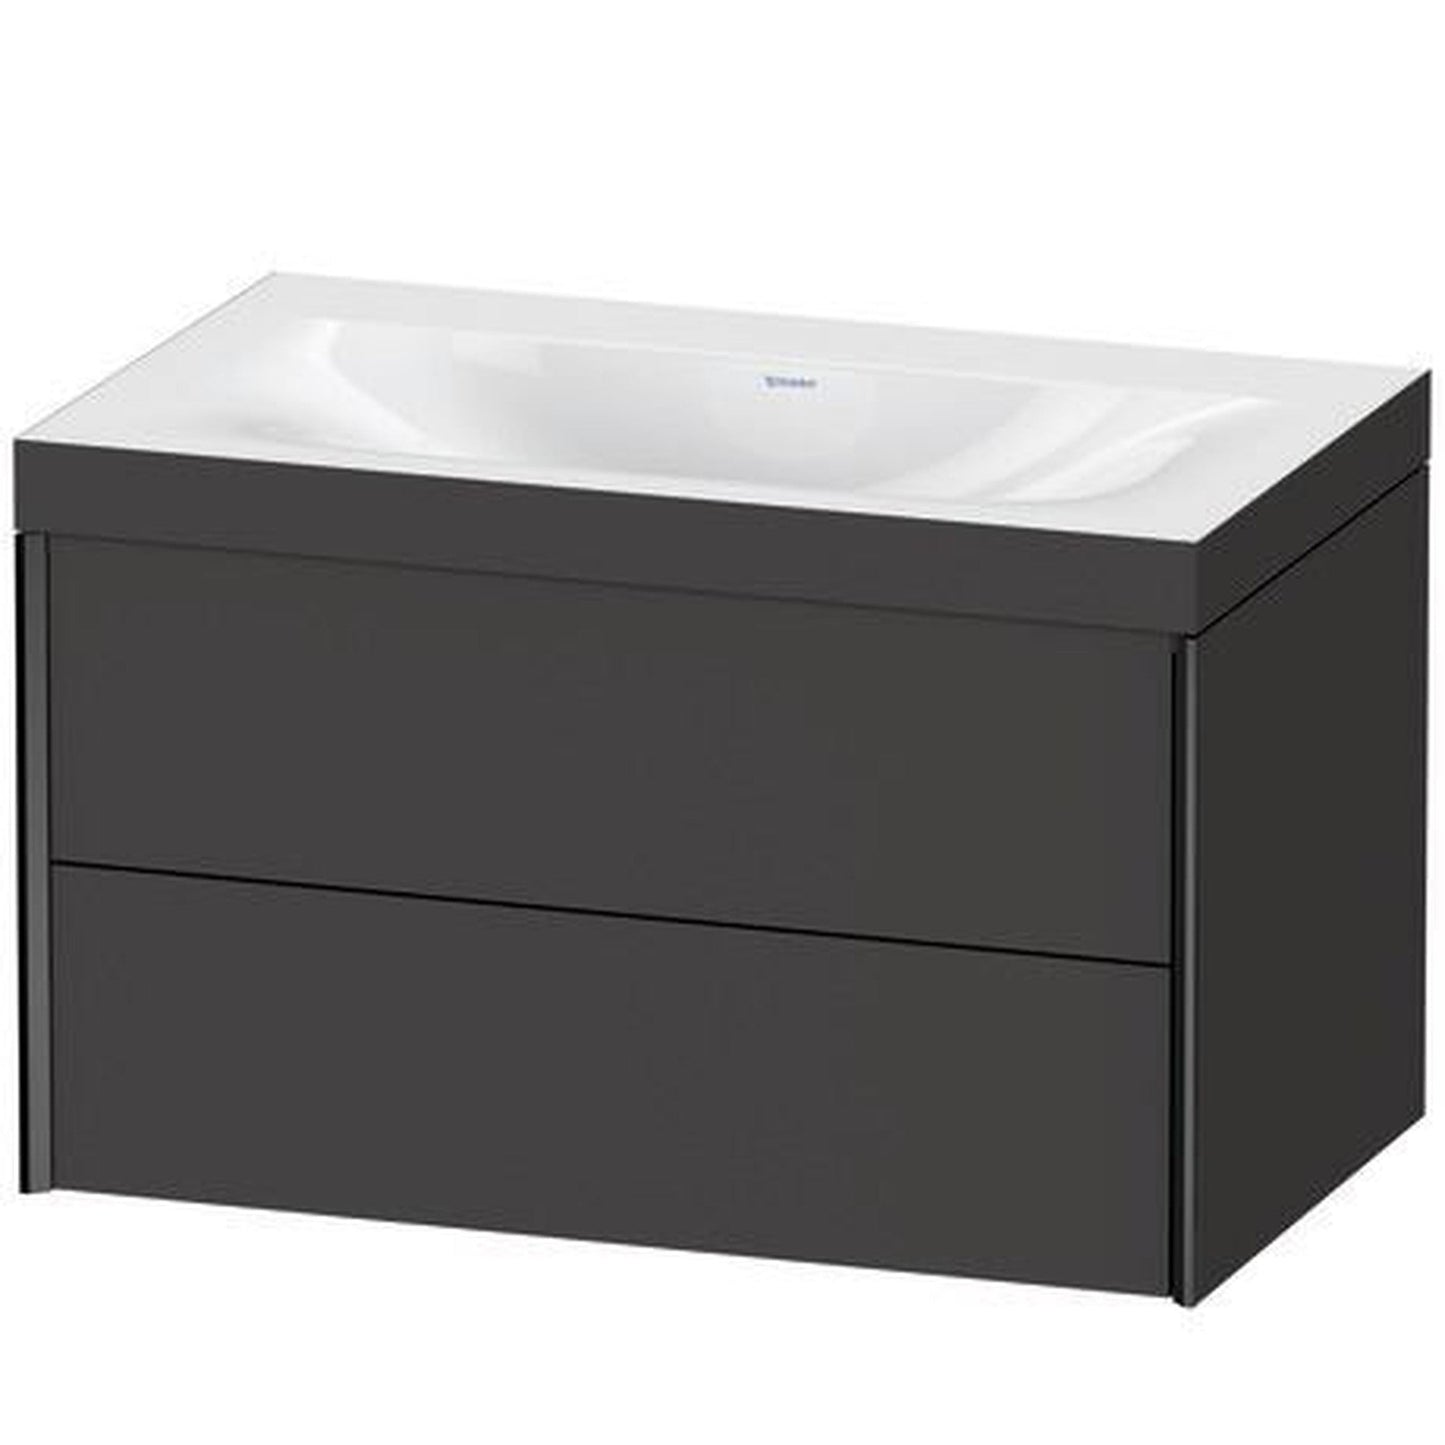 Duravit Xviu 31" x 20" x 19" Two Drawer C-Bonded Wall-Mount Vanity Kit Without Tap Hole, Graphite (XV4615NB280C)